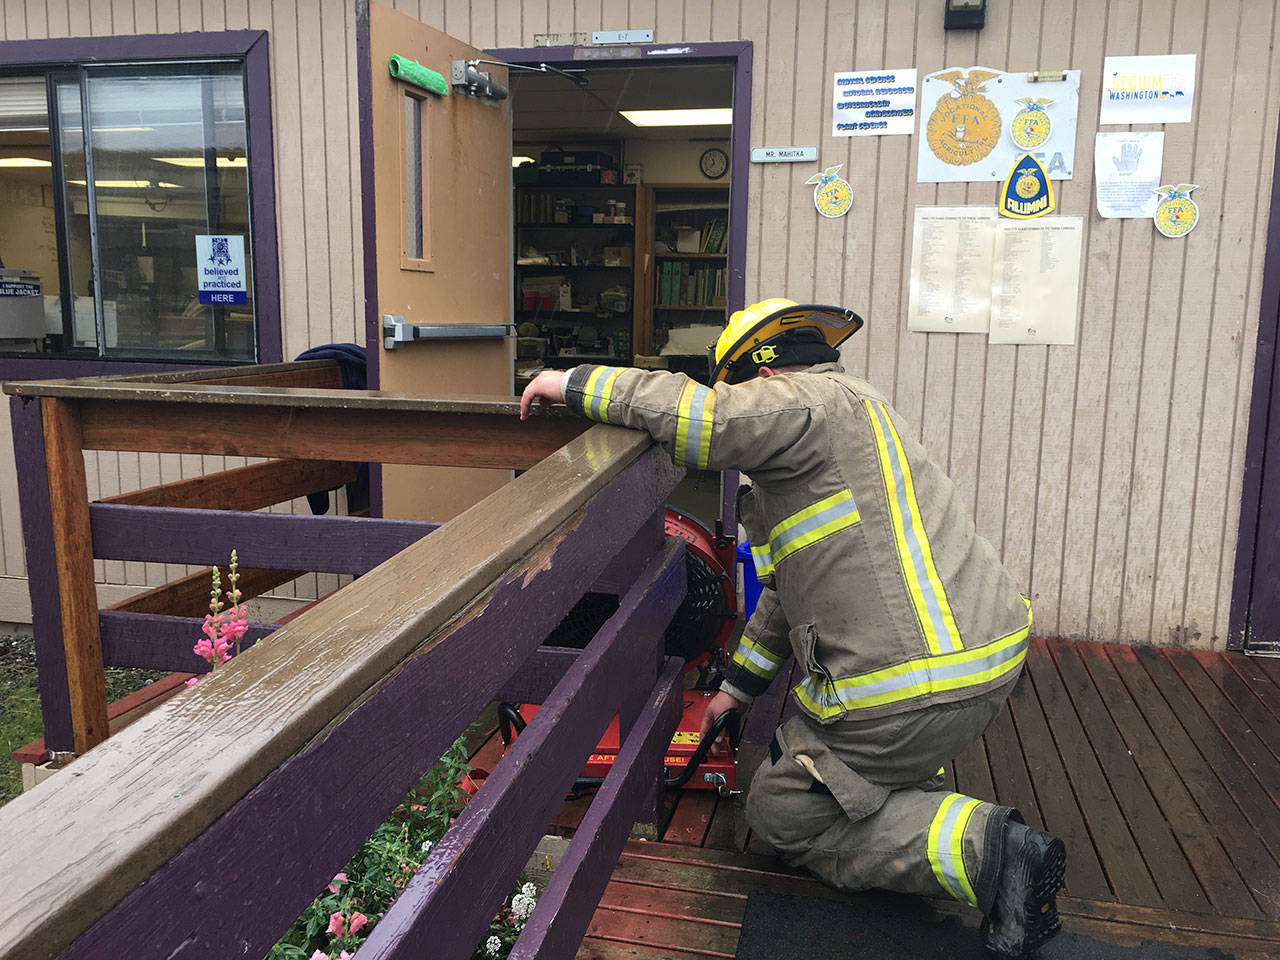 Firefighters with Clallam County Fire District 3 place fans outside this portable classroom at Sequim High School after a faulty heater started to smoke Friday. (Matthew Nash/Olympic Peninsula News Group)